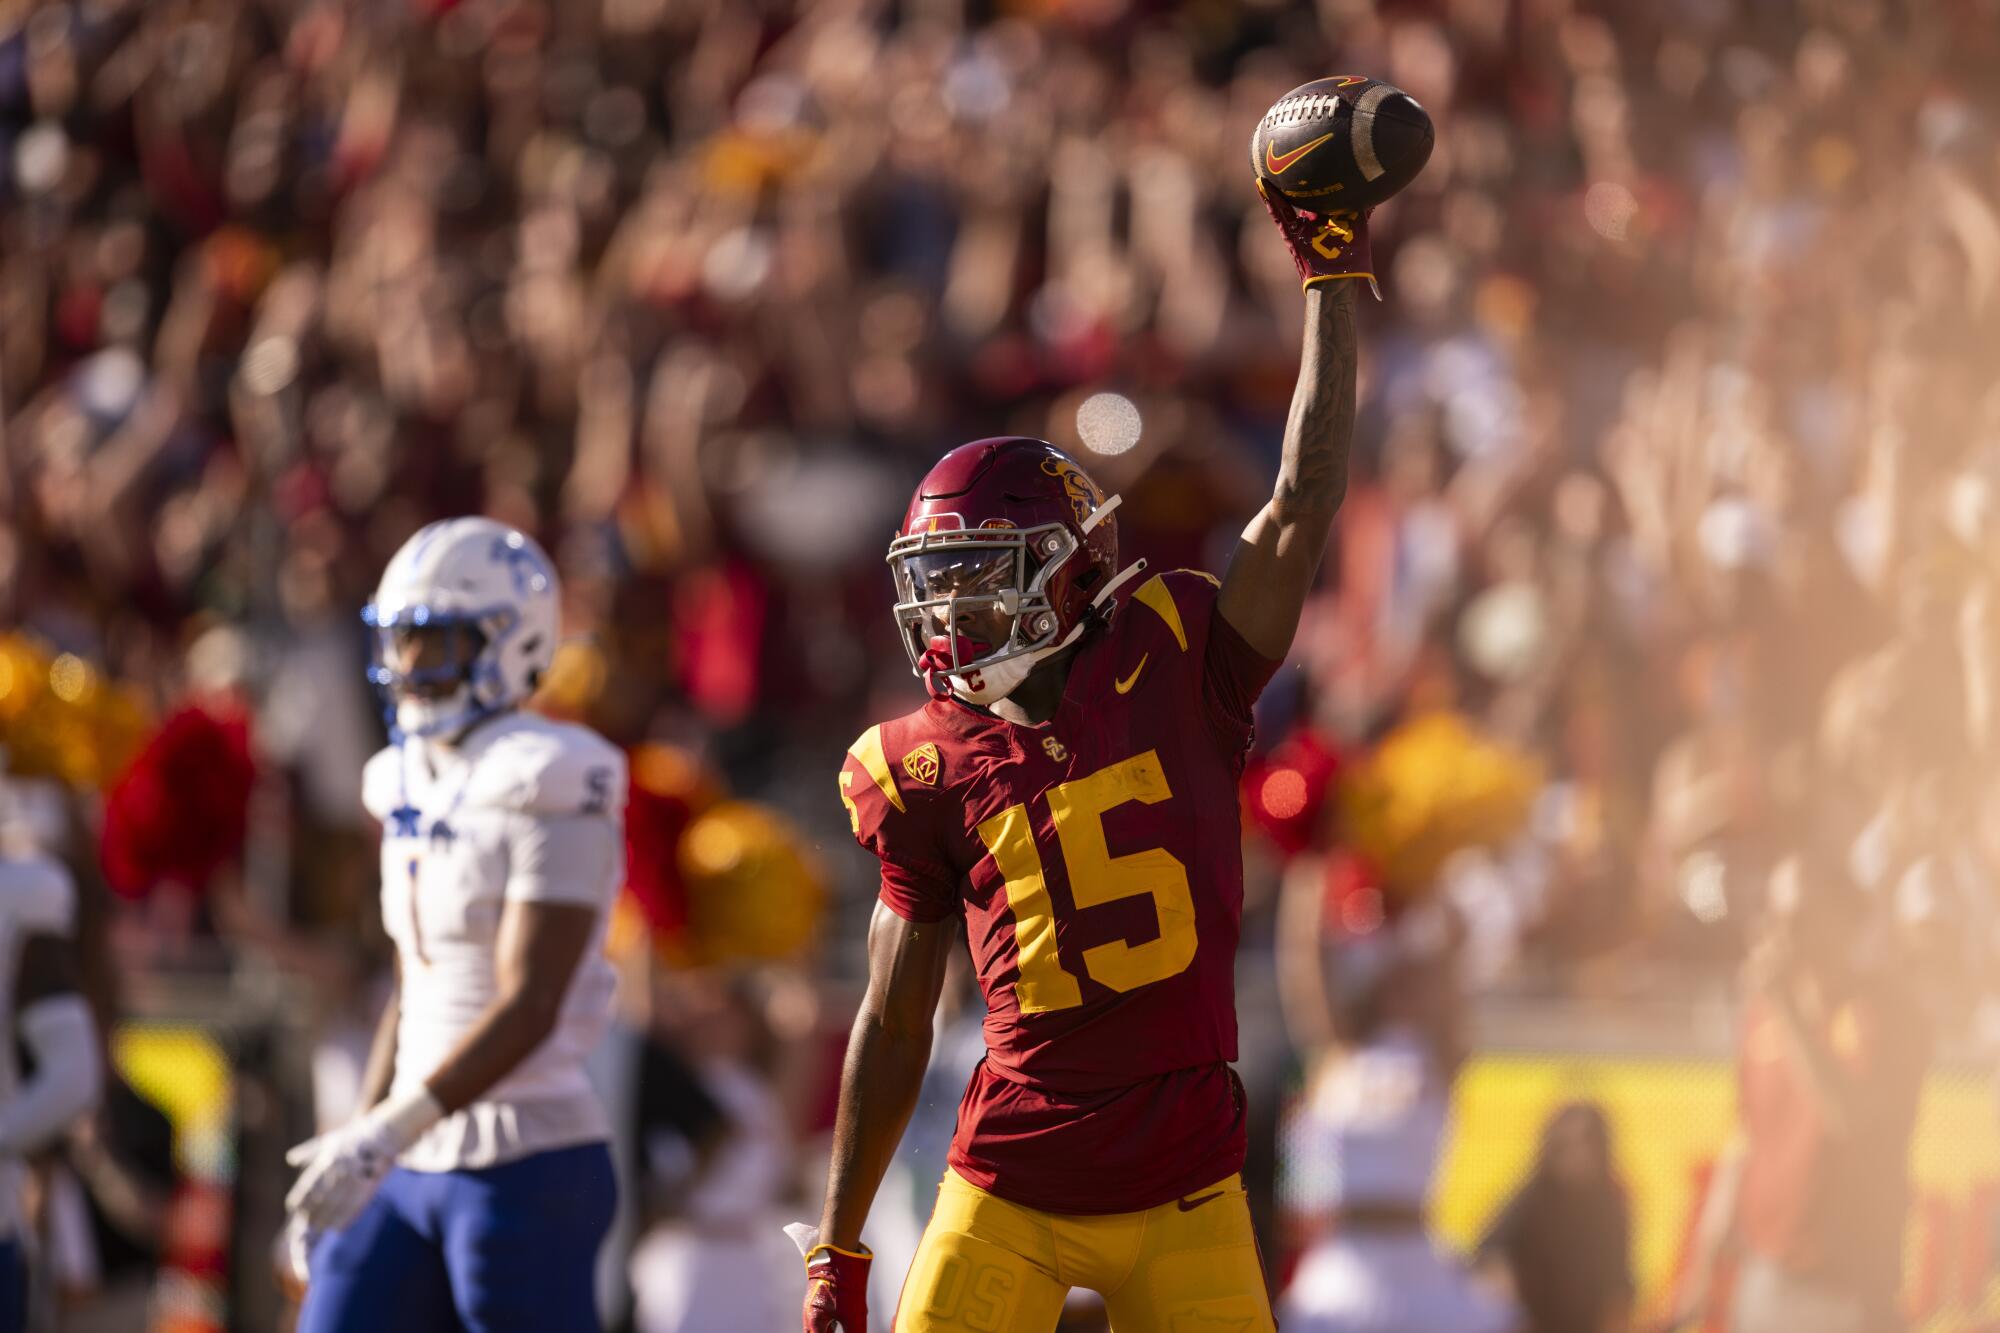 Dorian Singer celebrates after scoring a touchdown in a win over San José State on Saturday.